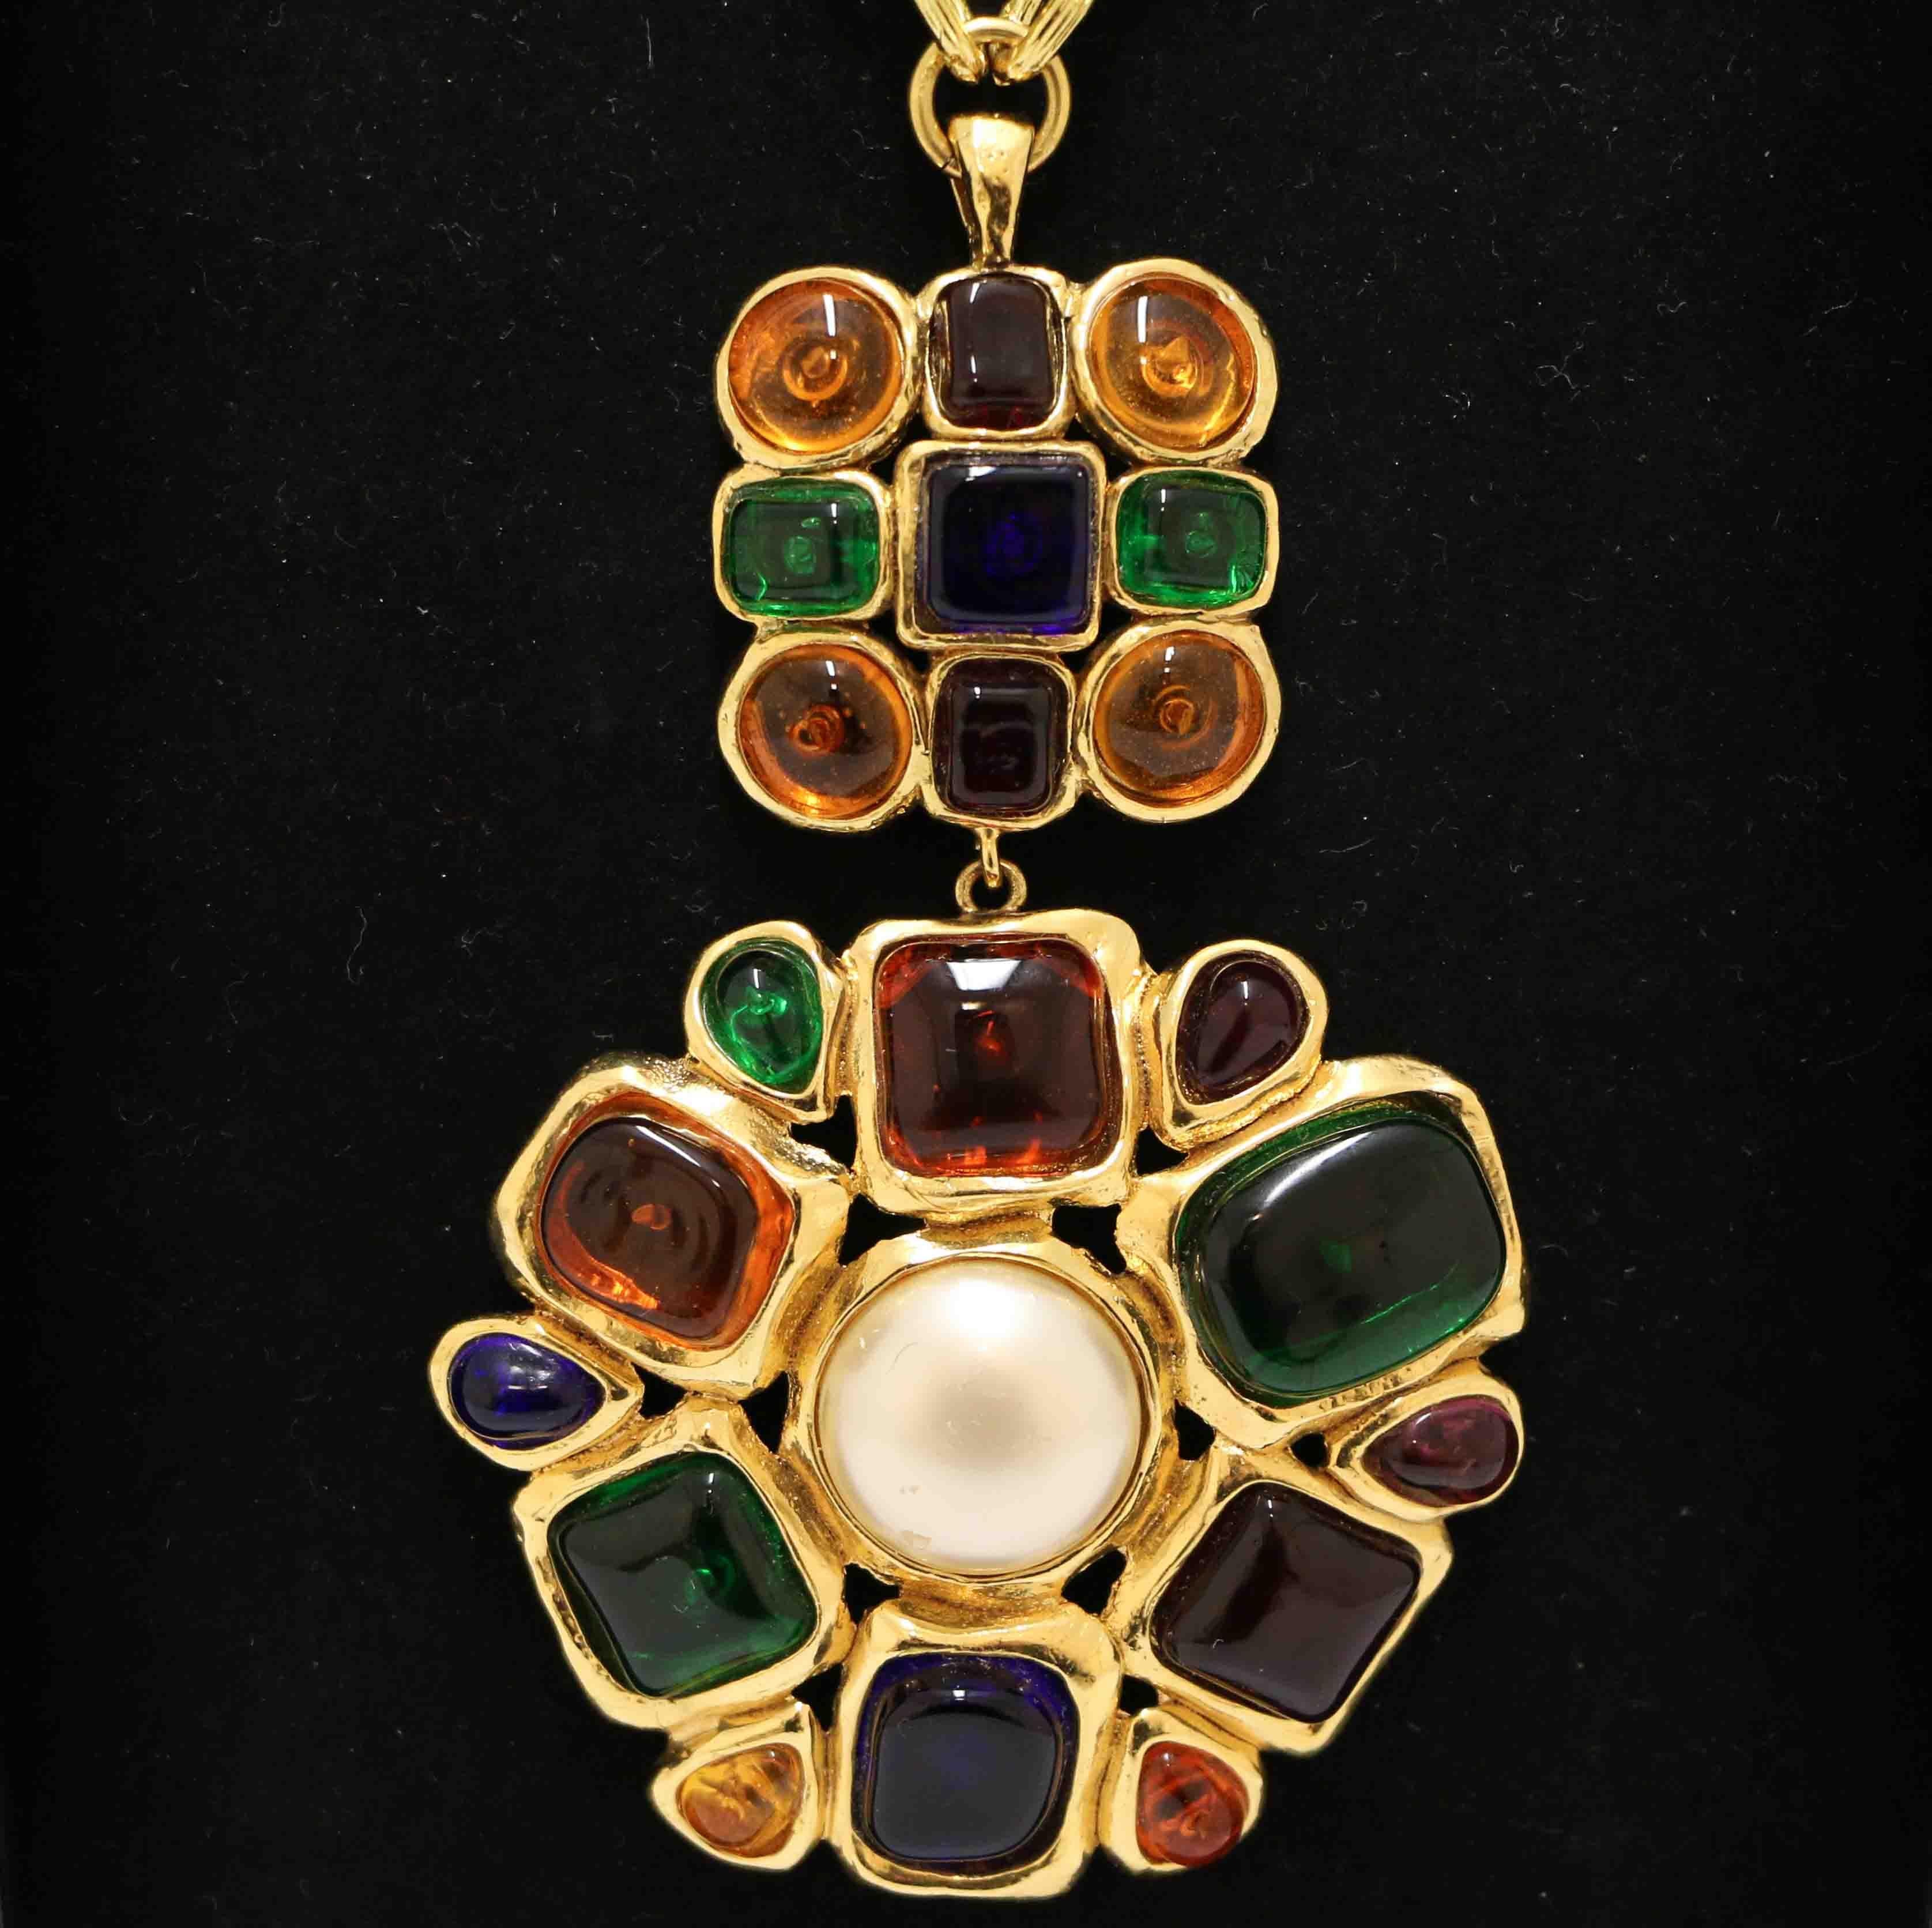 Rare and beautiful Chanel necklace with a pendant made in glass. An exceptional piece of the 90s. 

Condition : Very good
Made in France
Materials : metal, glass paste
Colors : gold, pearl, emerald, saphire, ruby, orange
Dimensions : chain's length